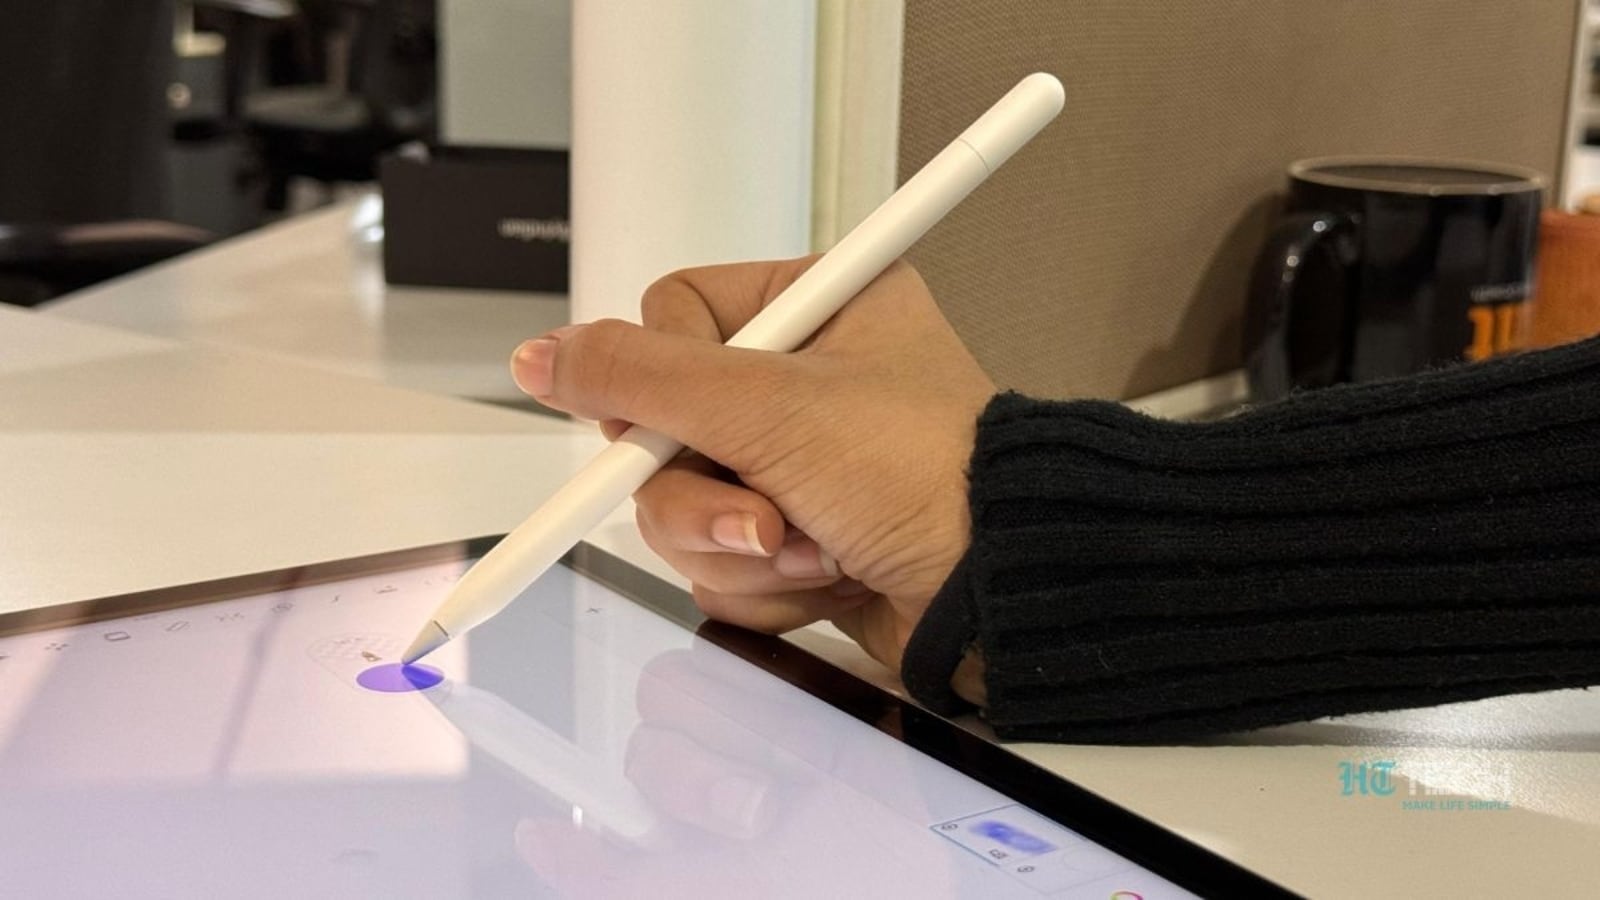 Apple CEO Tim Cook teases ‘Pencil 3’ along with new iPads ahead of May 7 special event